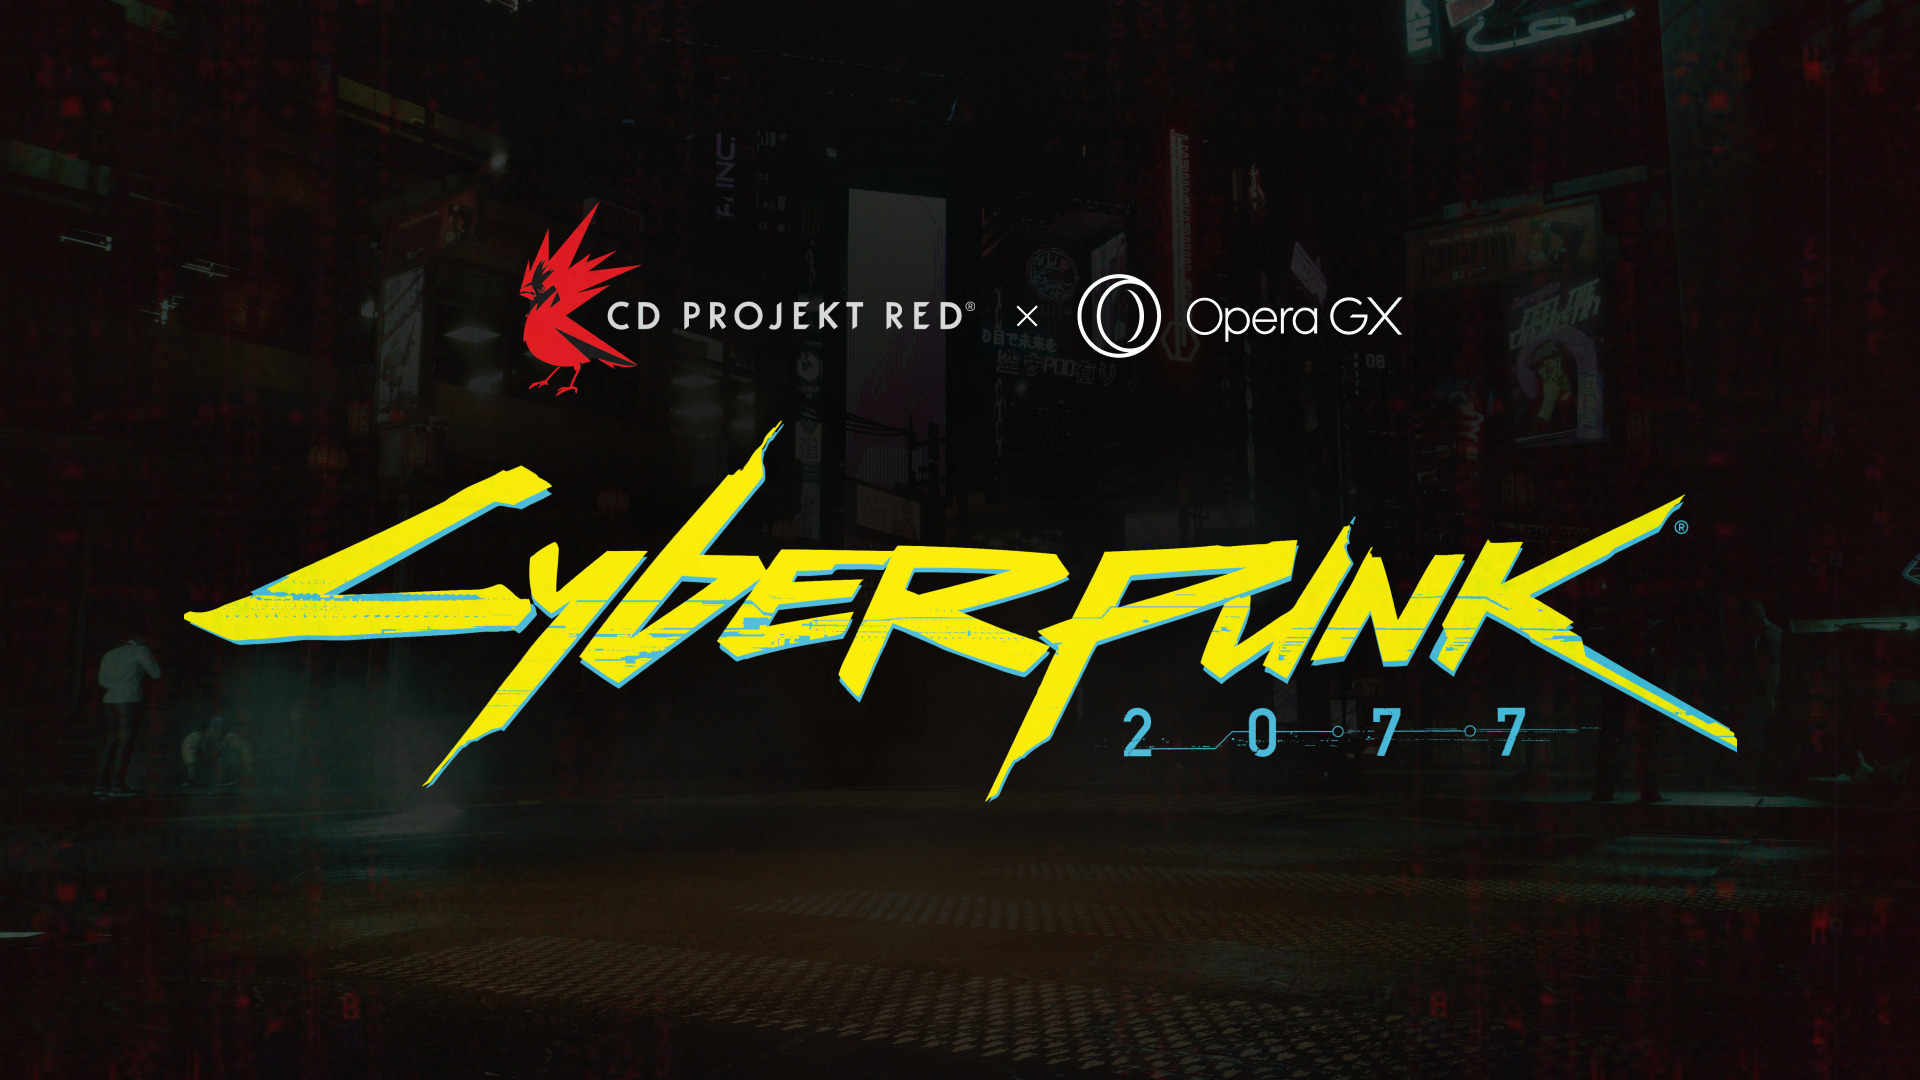 Opera GX joined forces with CD PROJEKT RED to release a stunning official Cyberpunk 2077 browser mod.